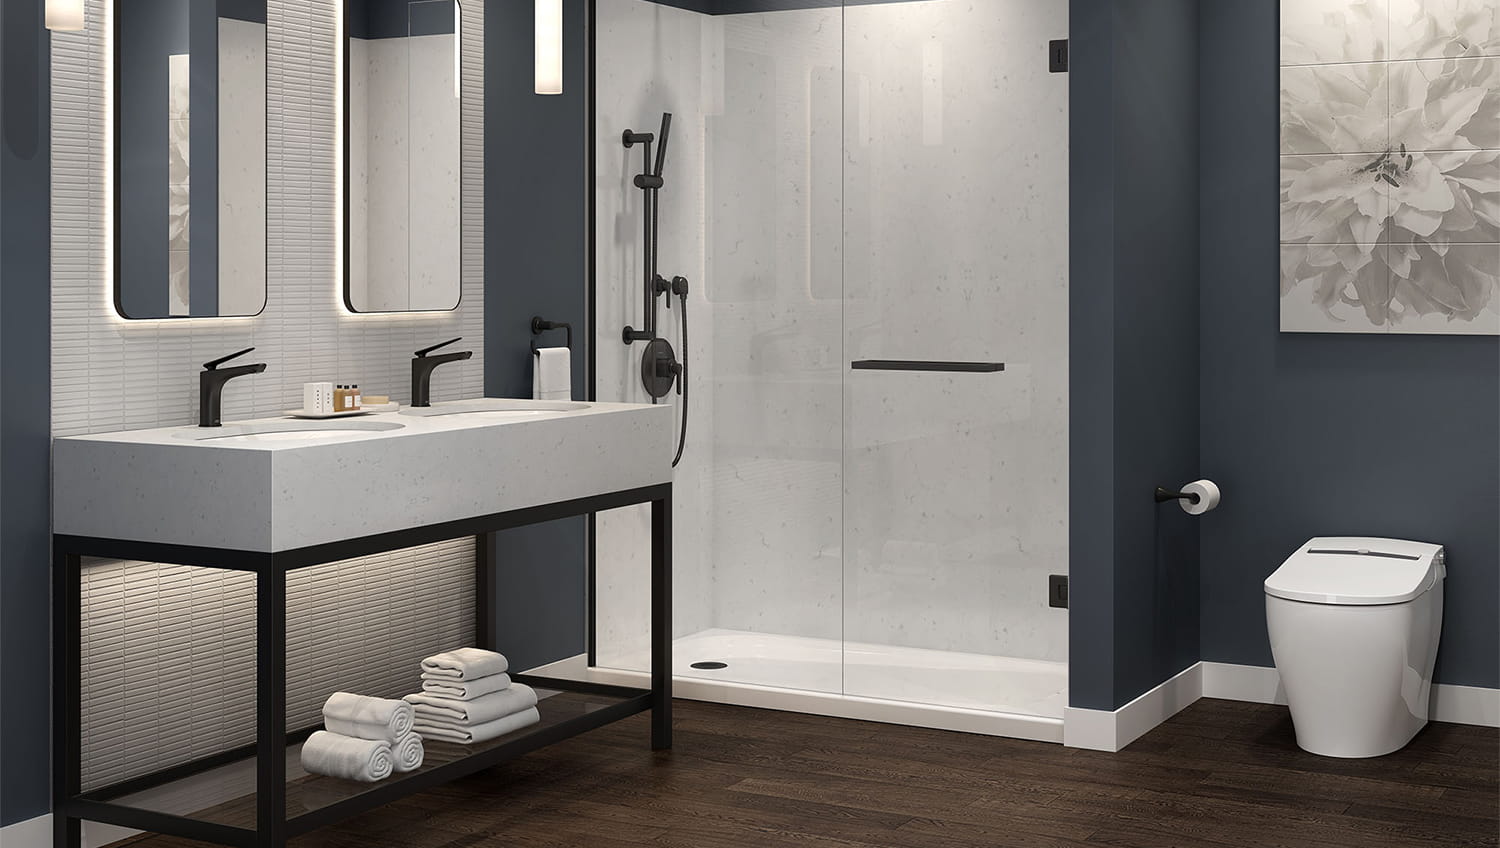 SpaLet Contemporary Bathroom Collection from DXV